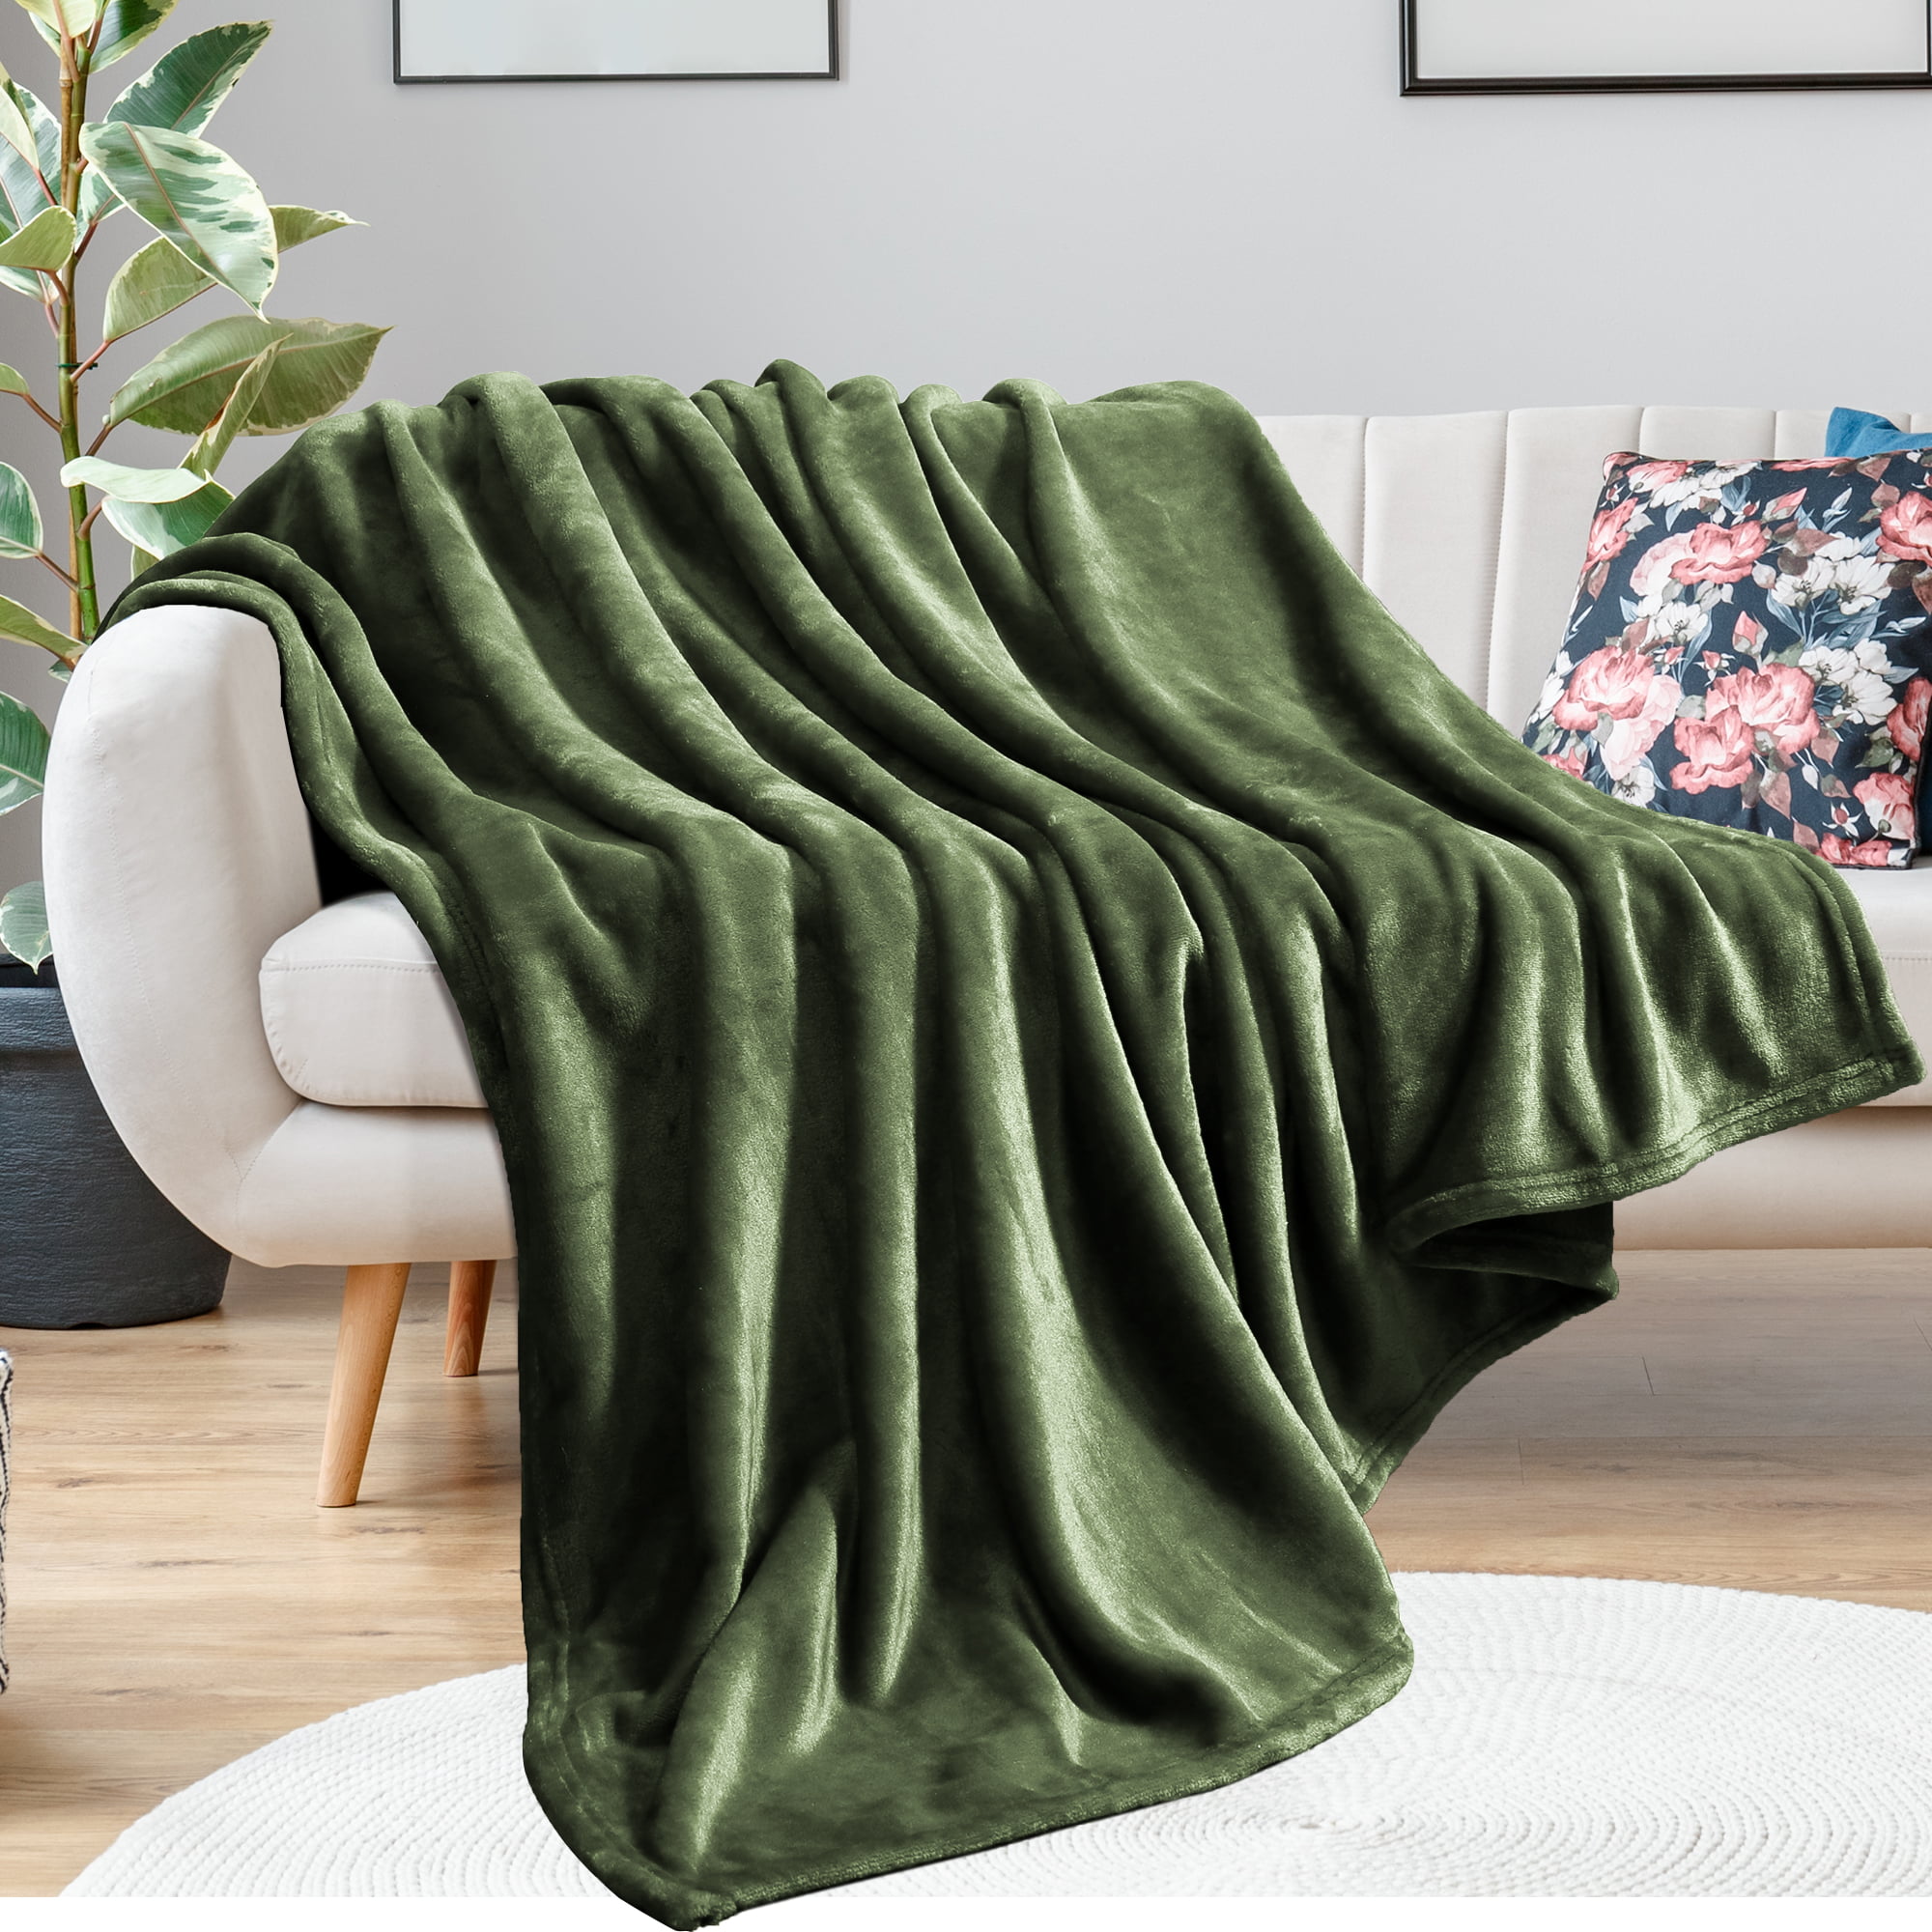 ALAZA American Football Green Field Blanket 76.8 x 60 inch Flannel Blankets Throw Blanket for Bedroom Living Rooms Sofa Travelling Camping 